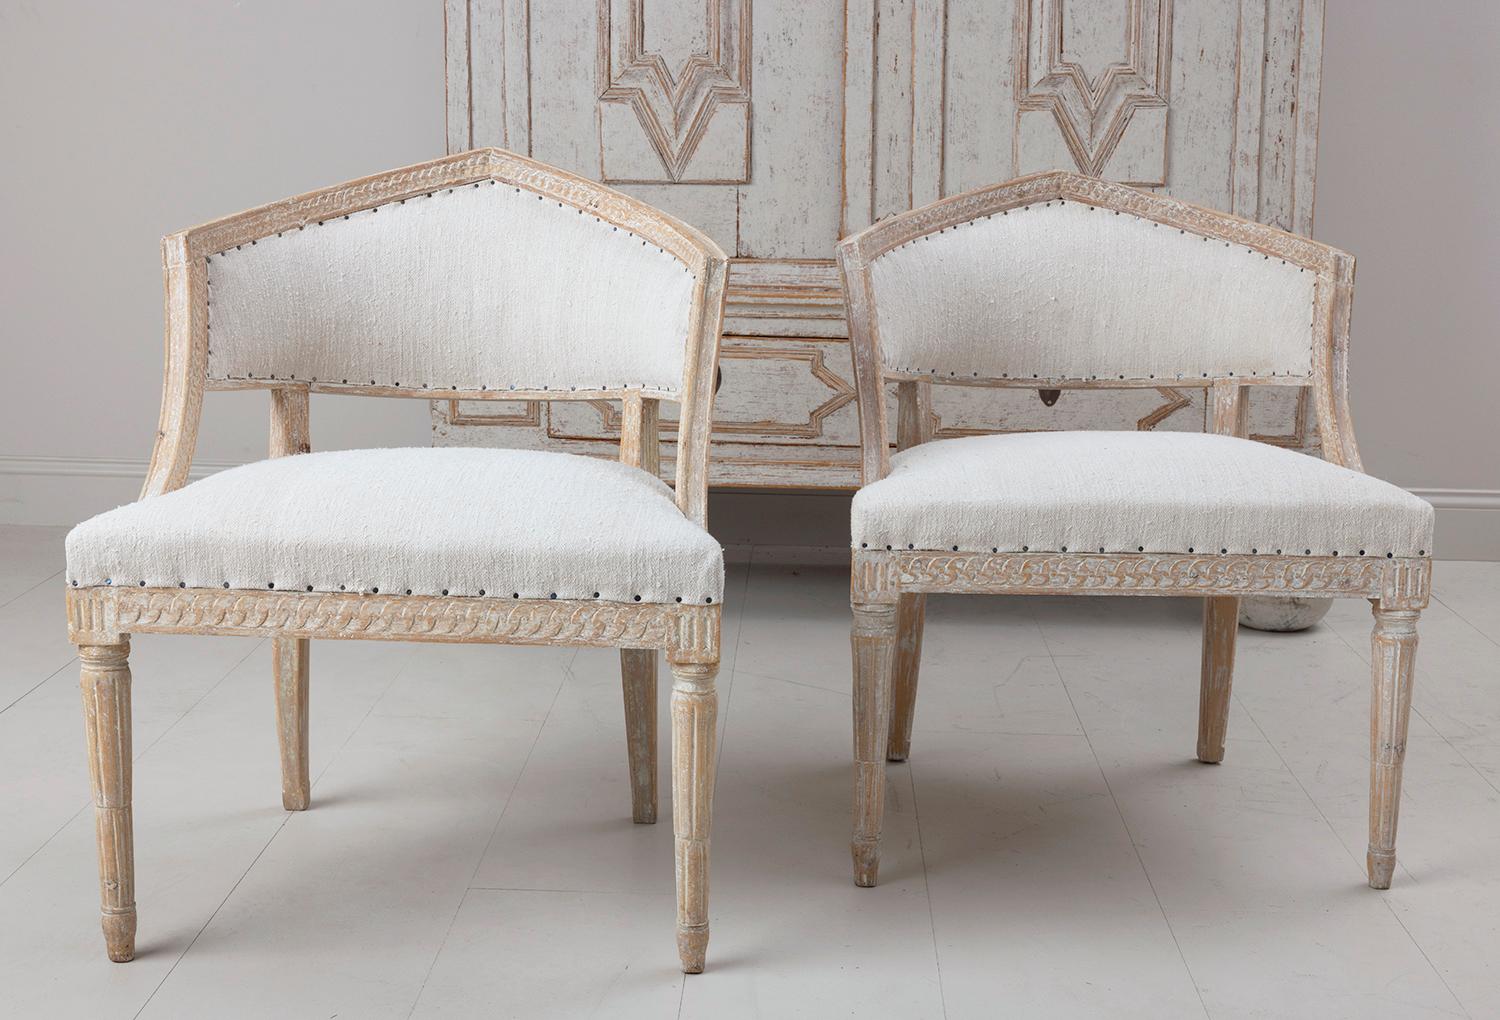 A pair of Swedish chairs with unique sulla barrel backs. Stunning chairs from the Gustavian period wearing original paint and newly upholstered in antique linen with nail head trim. Beautifully carved guilloche pattern around the backs of the chairs